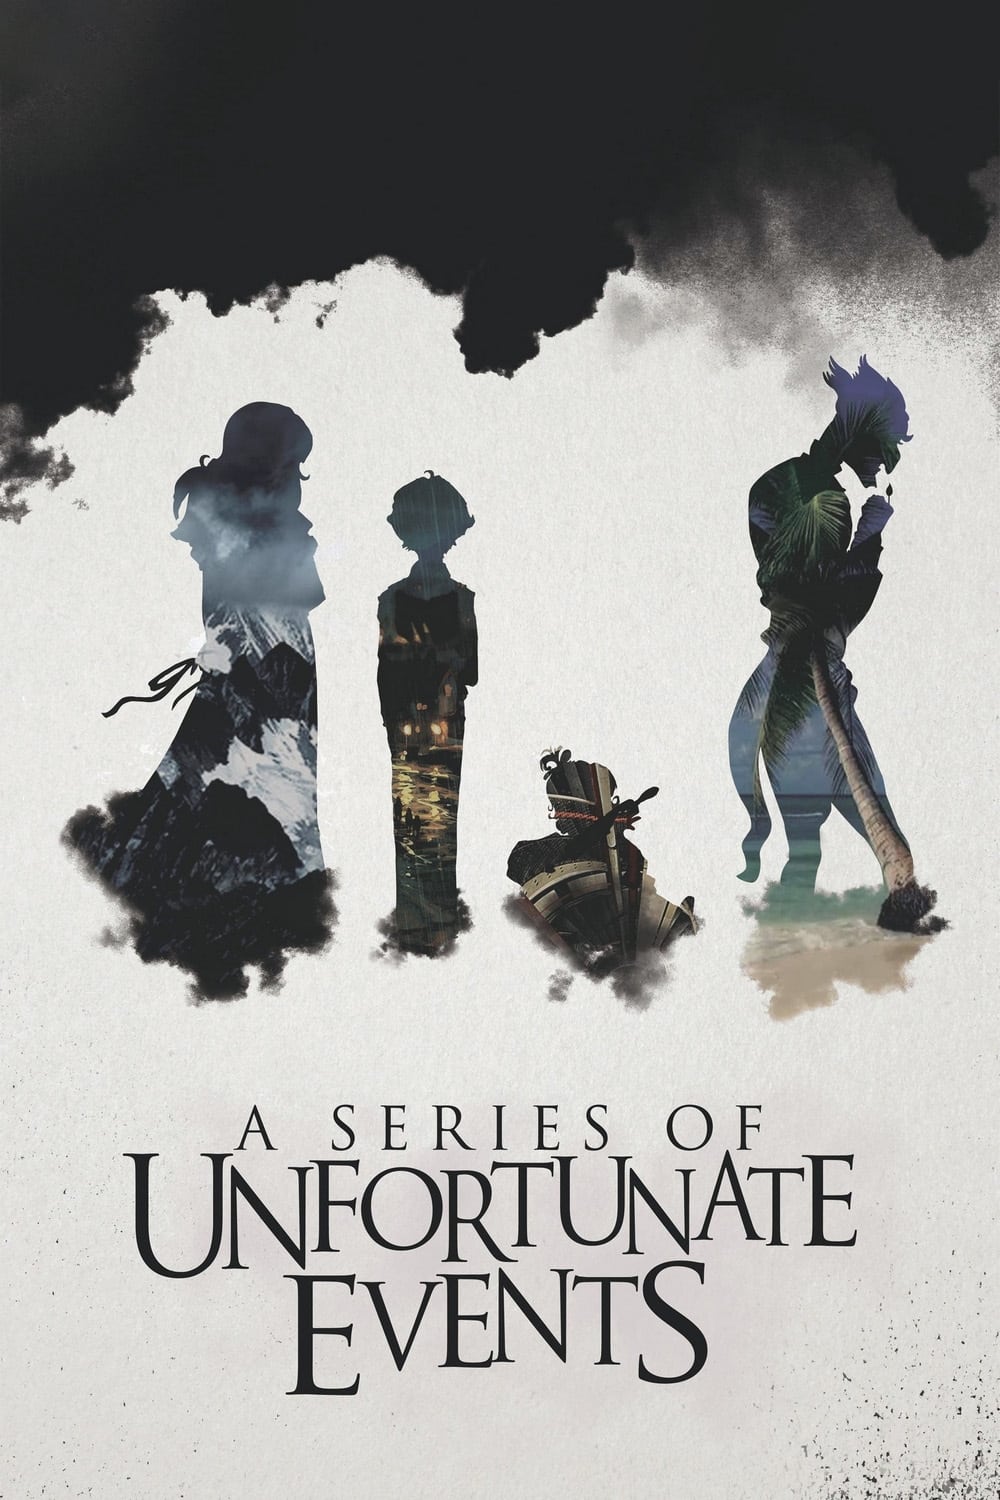 A Series of Unfortunate Events (2017-2019) [NF] WEB-DL 1080p Latino – CMHDD